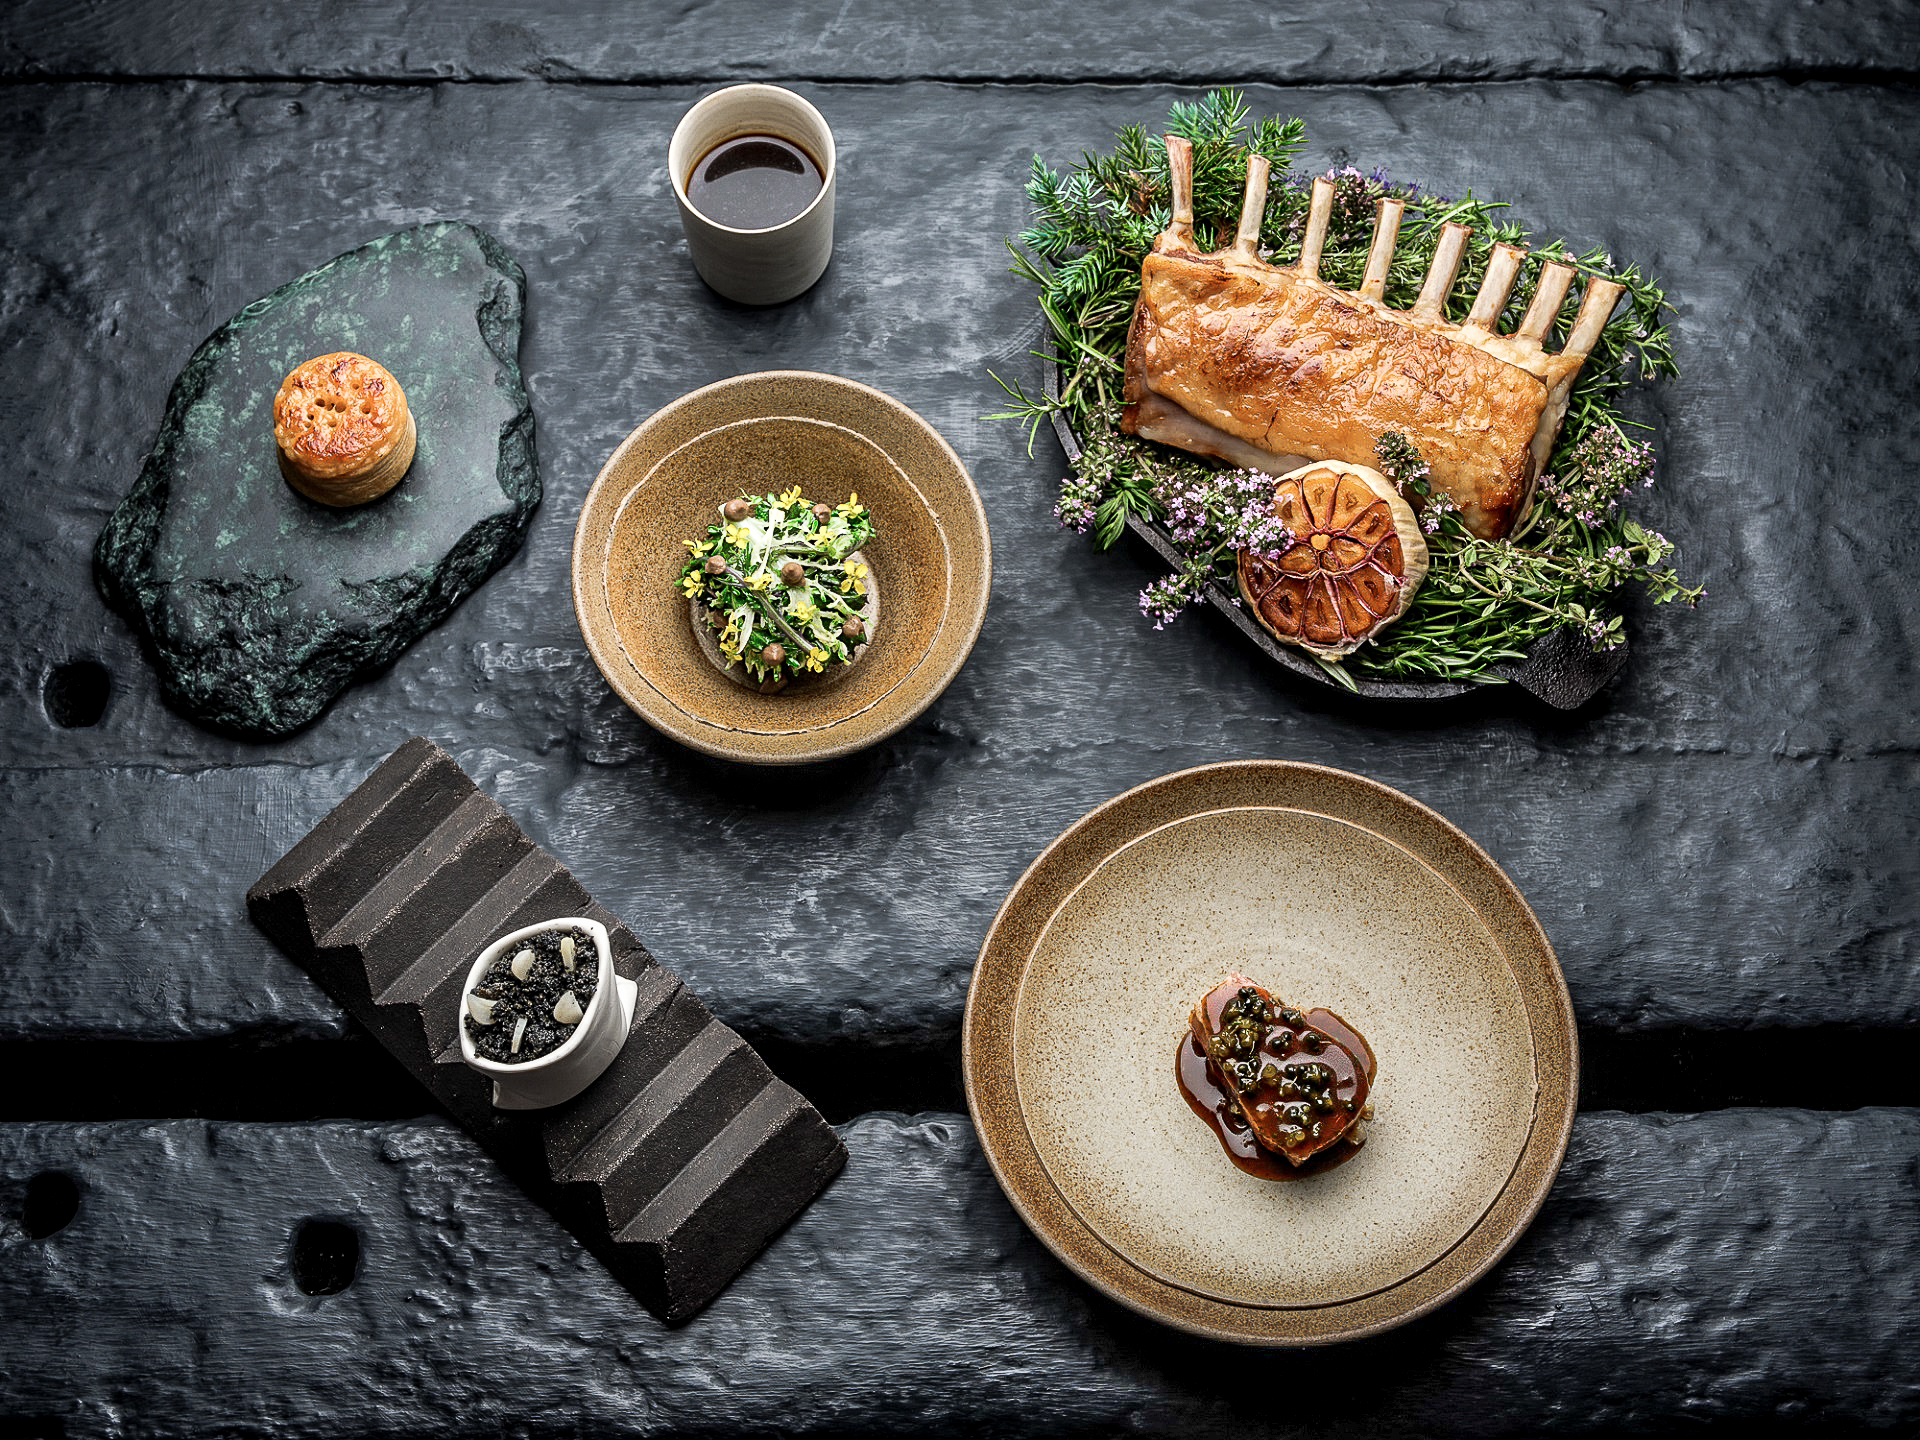 Roast lamb with side dishes by Simon Rogan